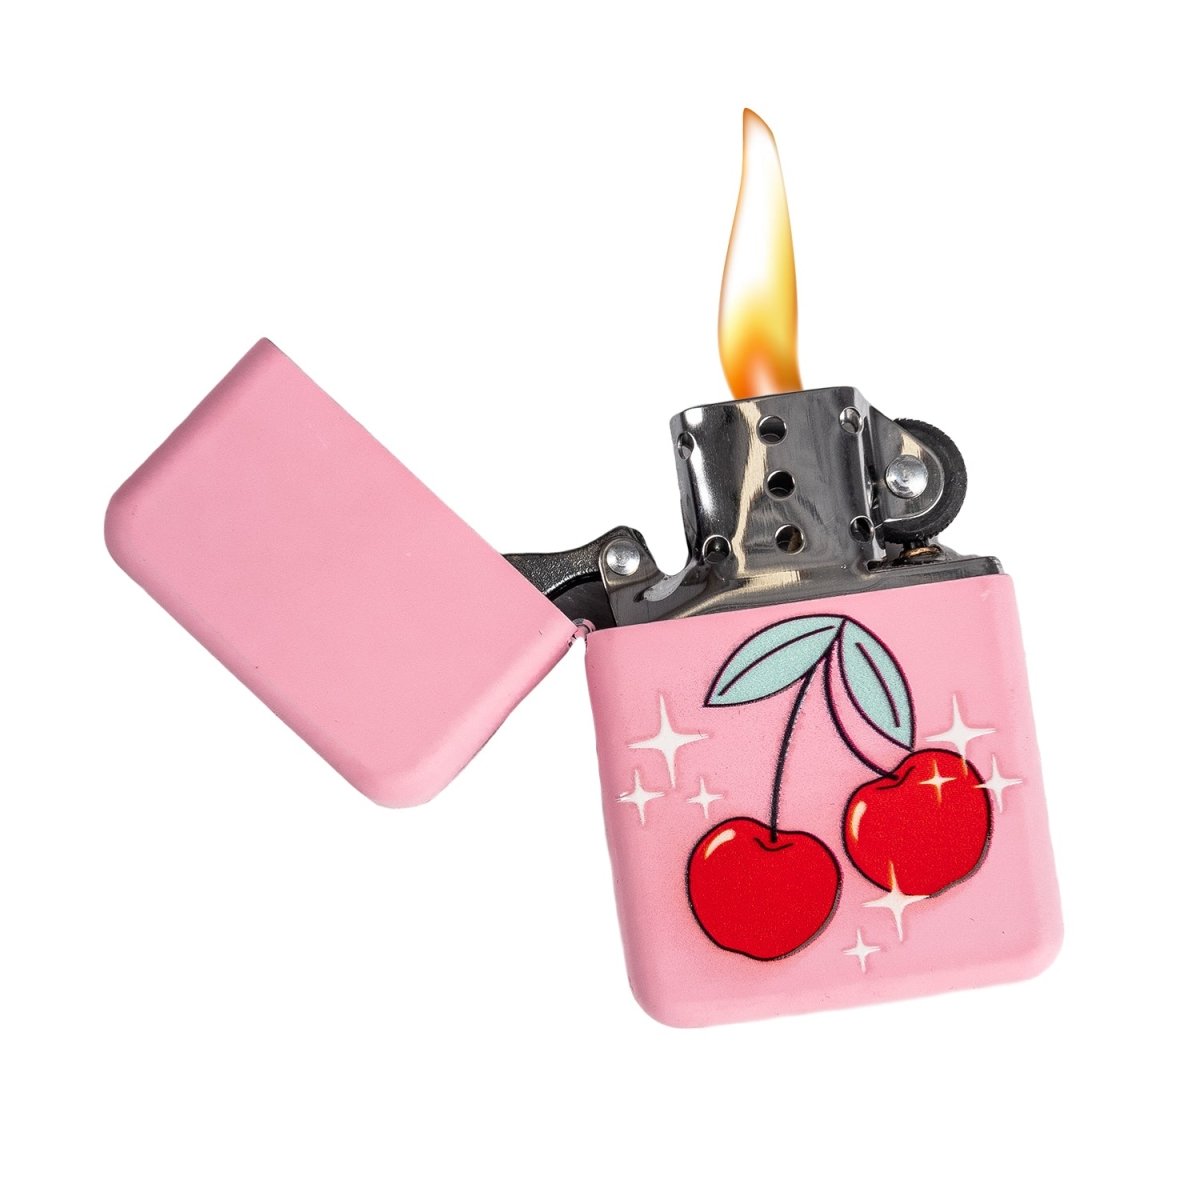 Too Fast | A Shop of Things | Refillable Cherry Lighter